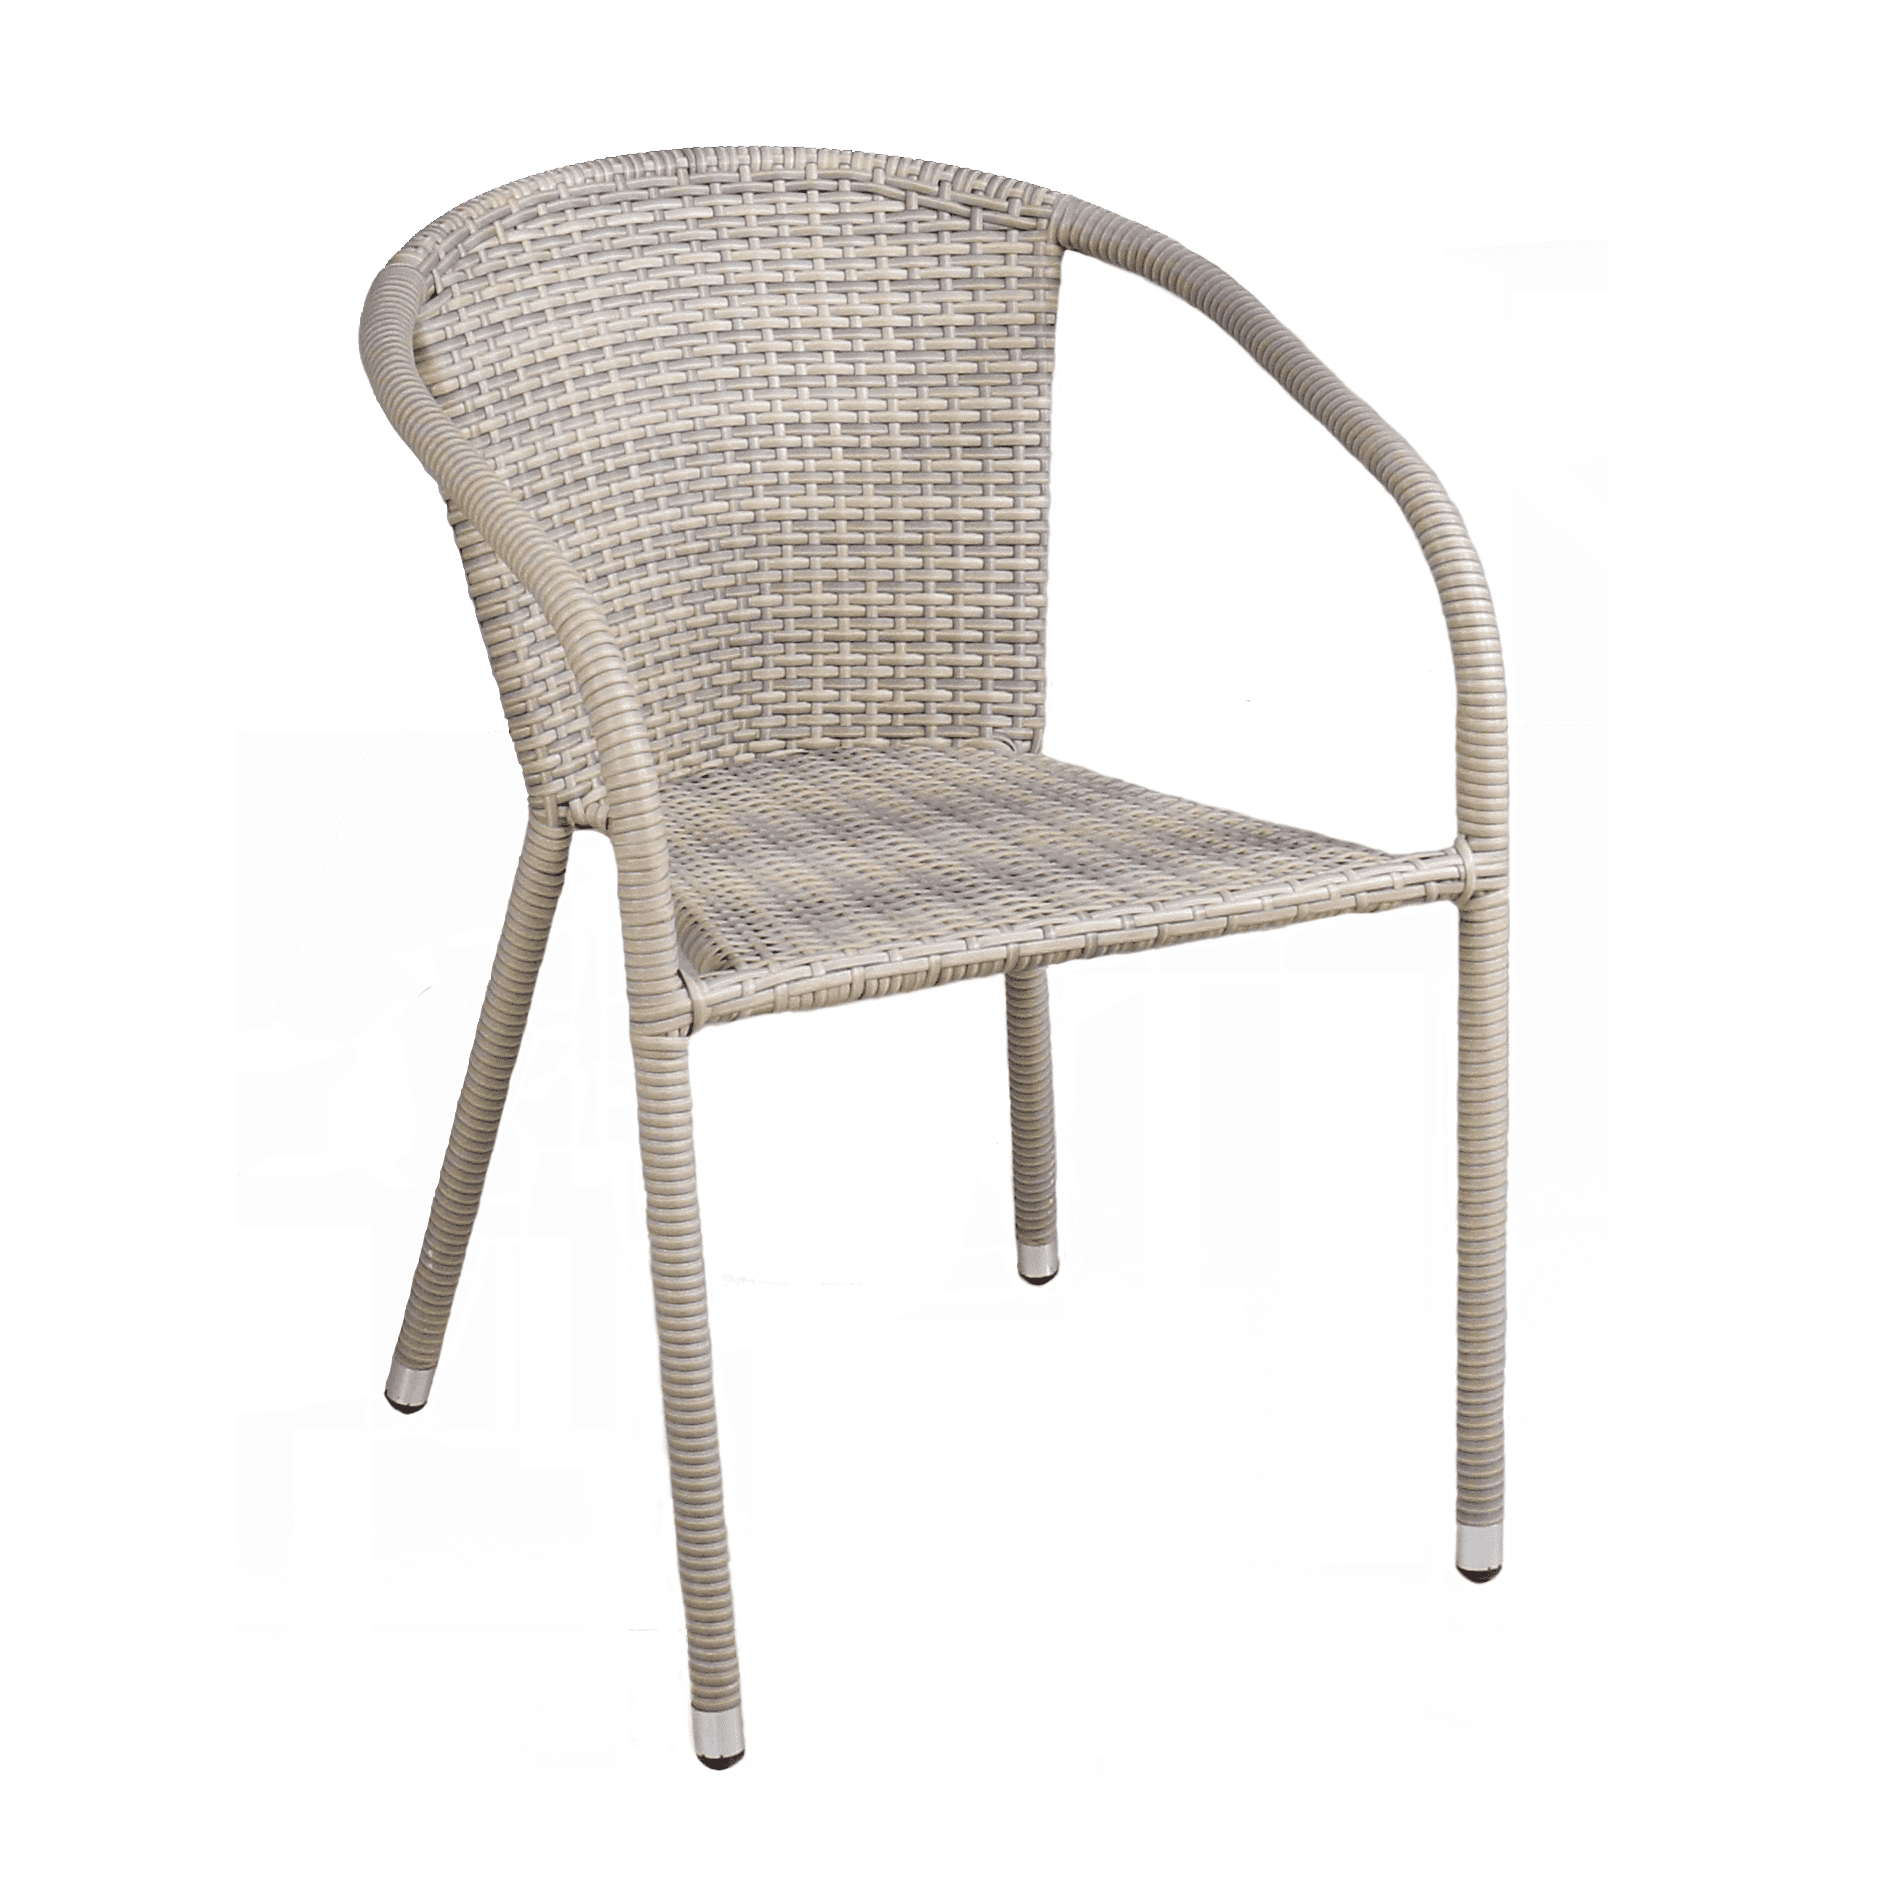 STACKABLE SOFIA CHAIR 57Xd59Xh77cm In steel covered in synthetic rattan